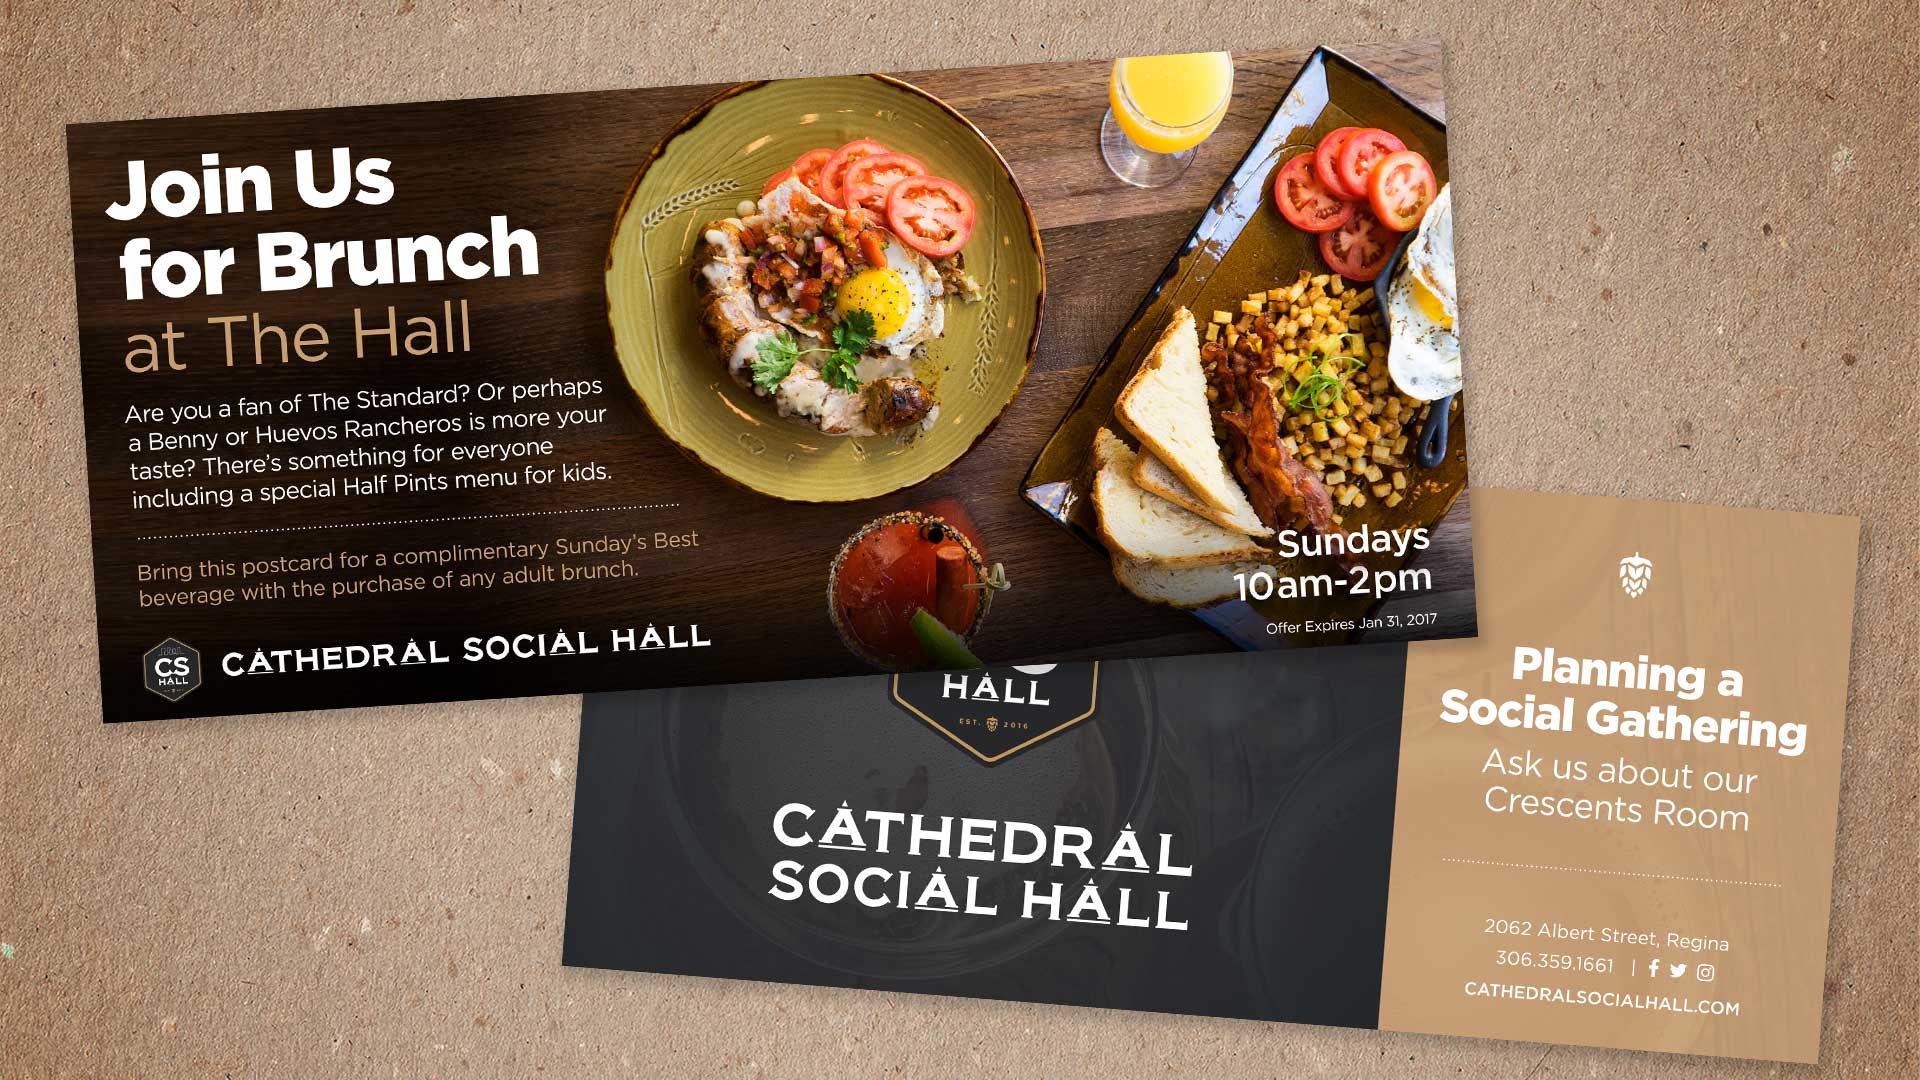 Cathedral Social Hall, Design, Cathedral Social Hall Brunch Mailer (AdMail), Portfolio Image, Cathedral Social Hall AdMail